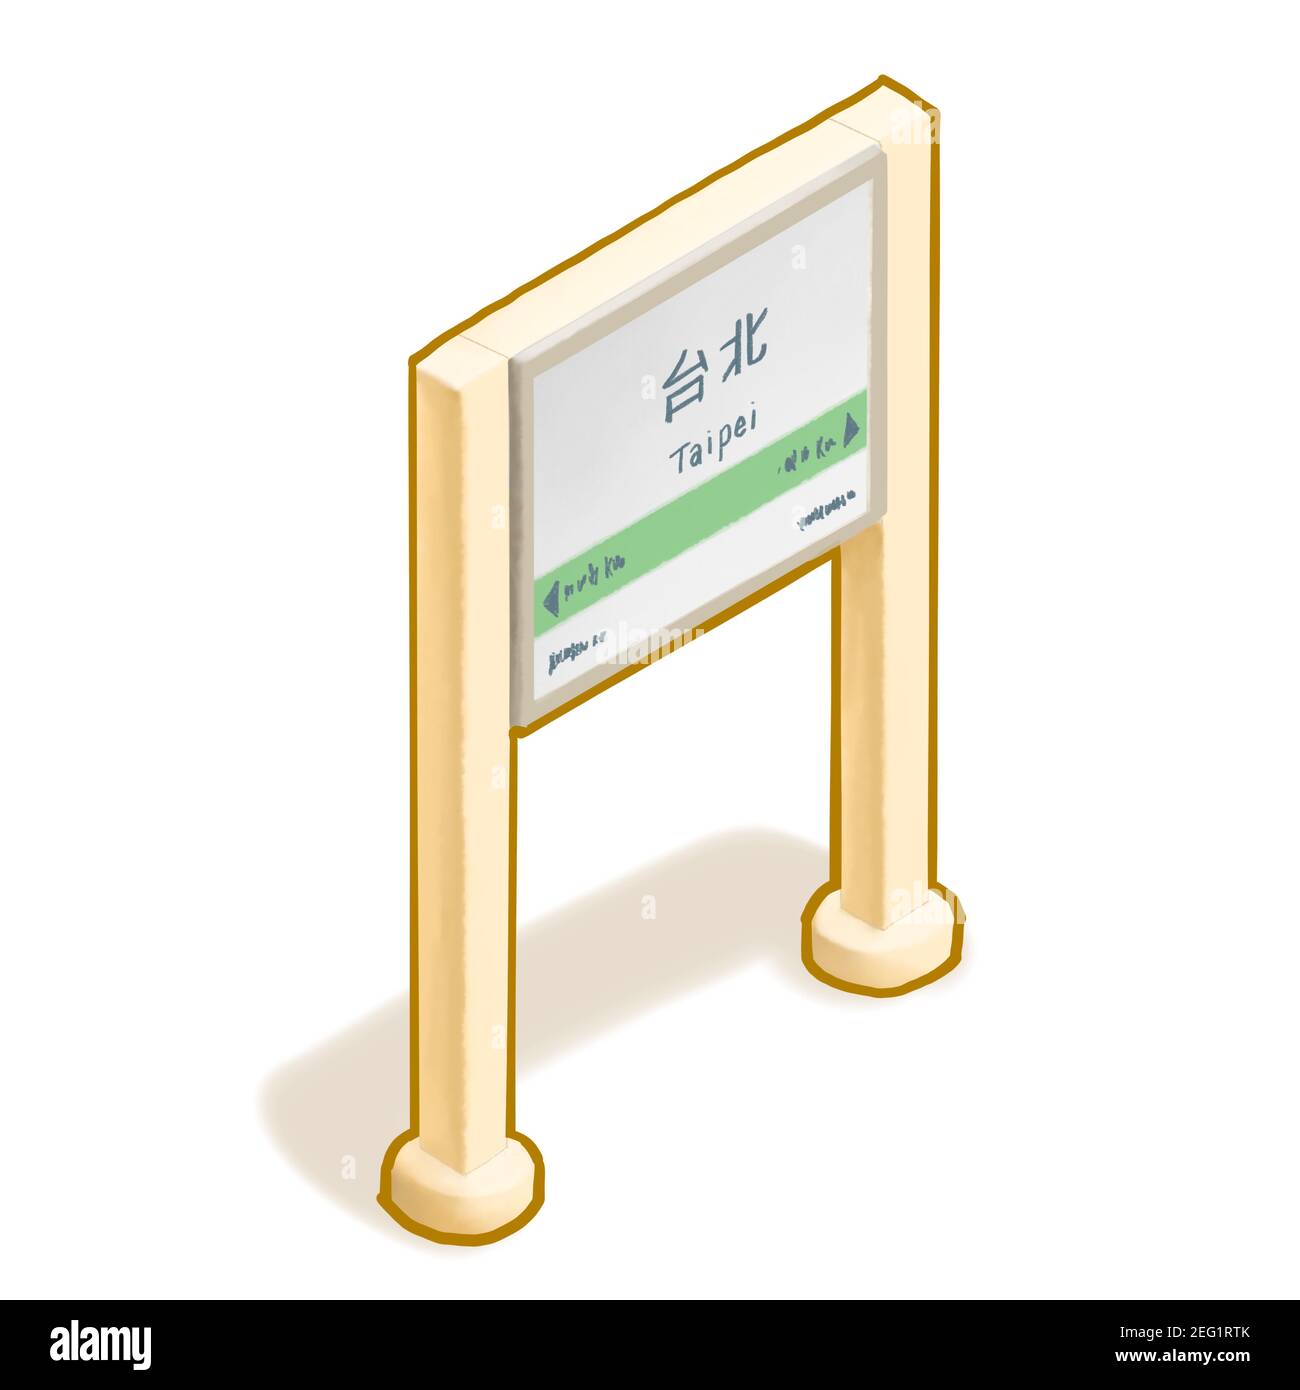 Station name board, a digital painting of Taipei railway station signboard for traveling by Taiwan train isometric cartoon icon raster 3D illustration Stock Photo